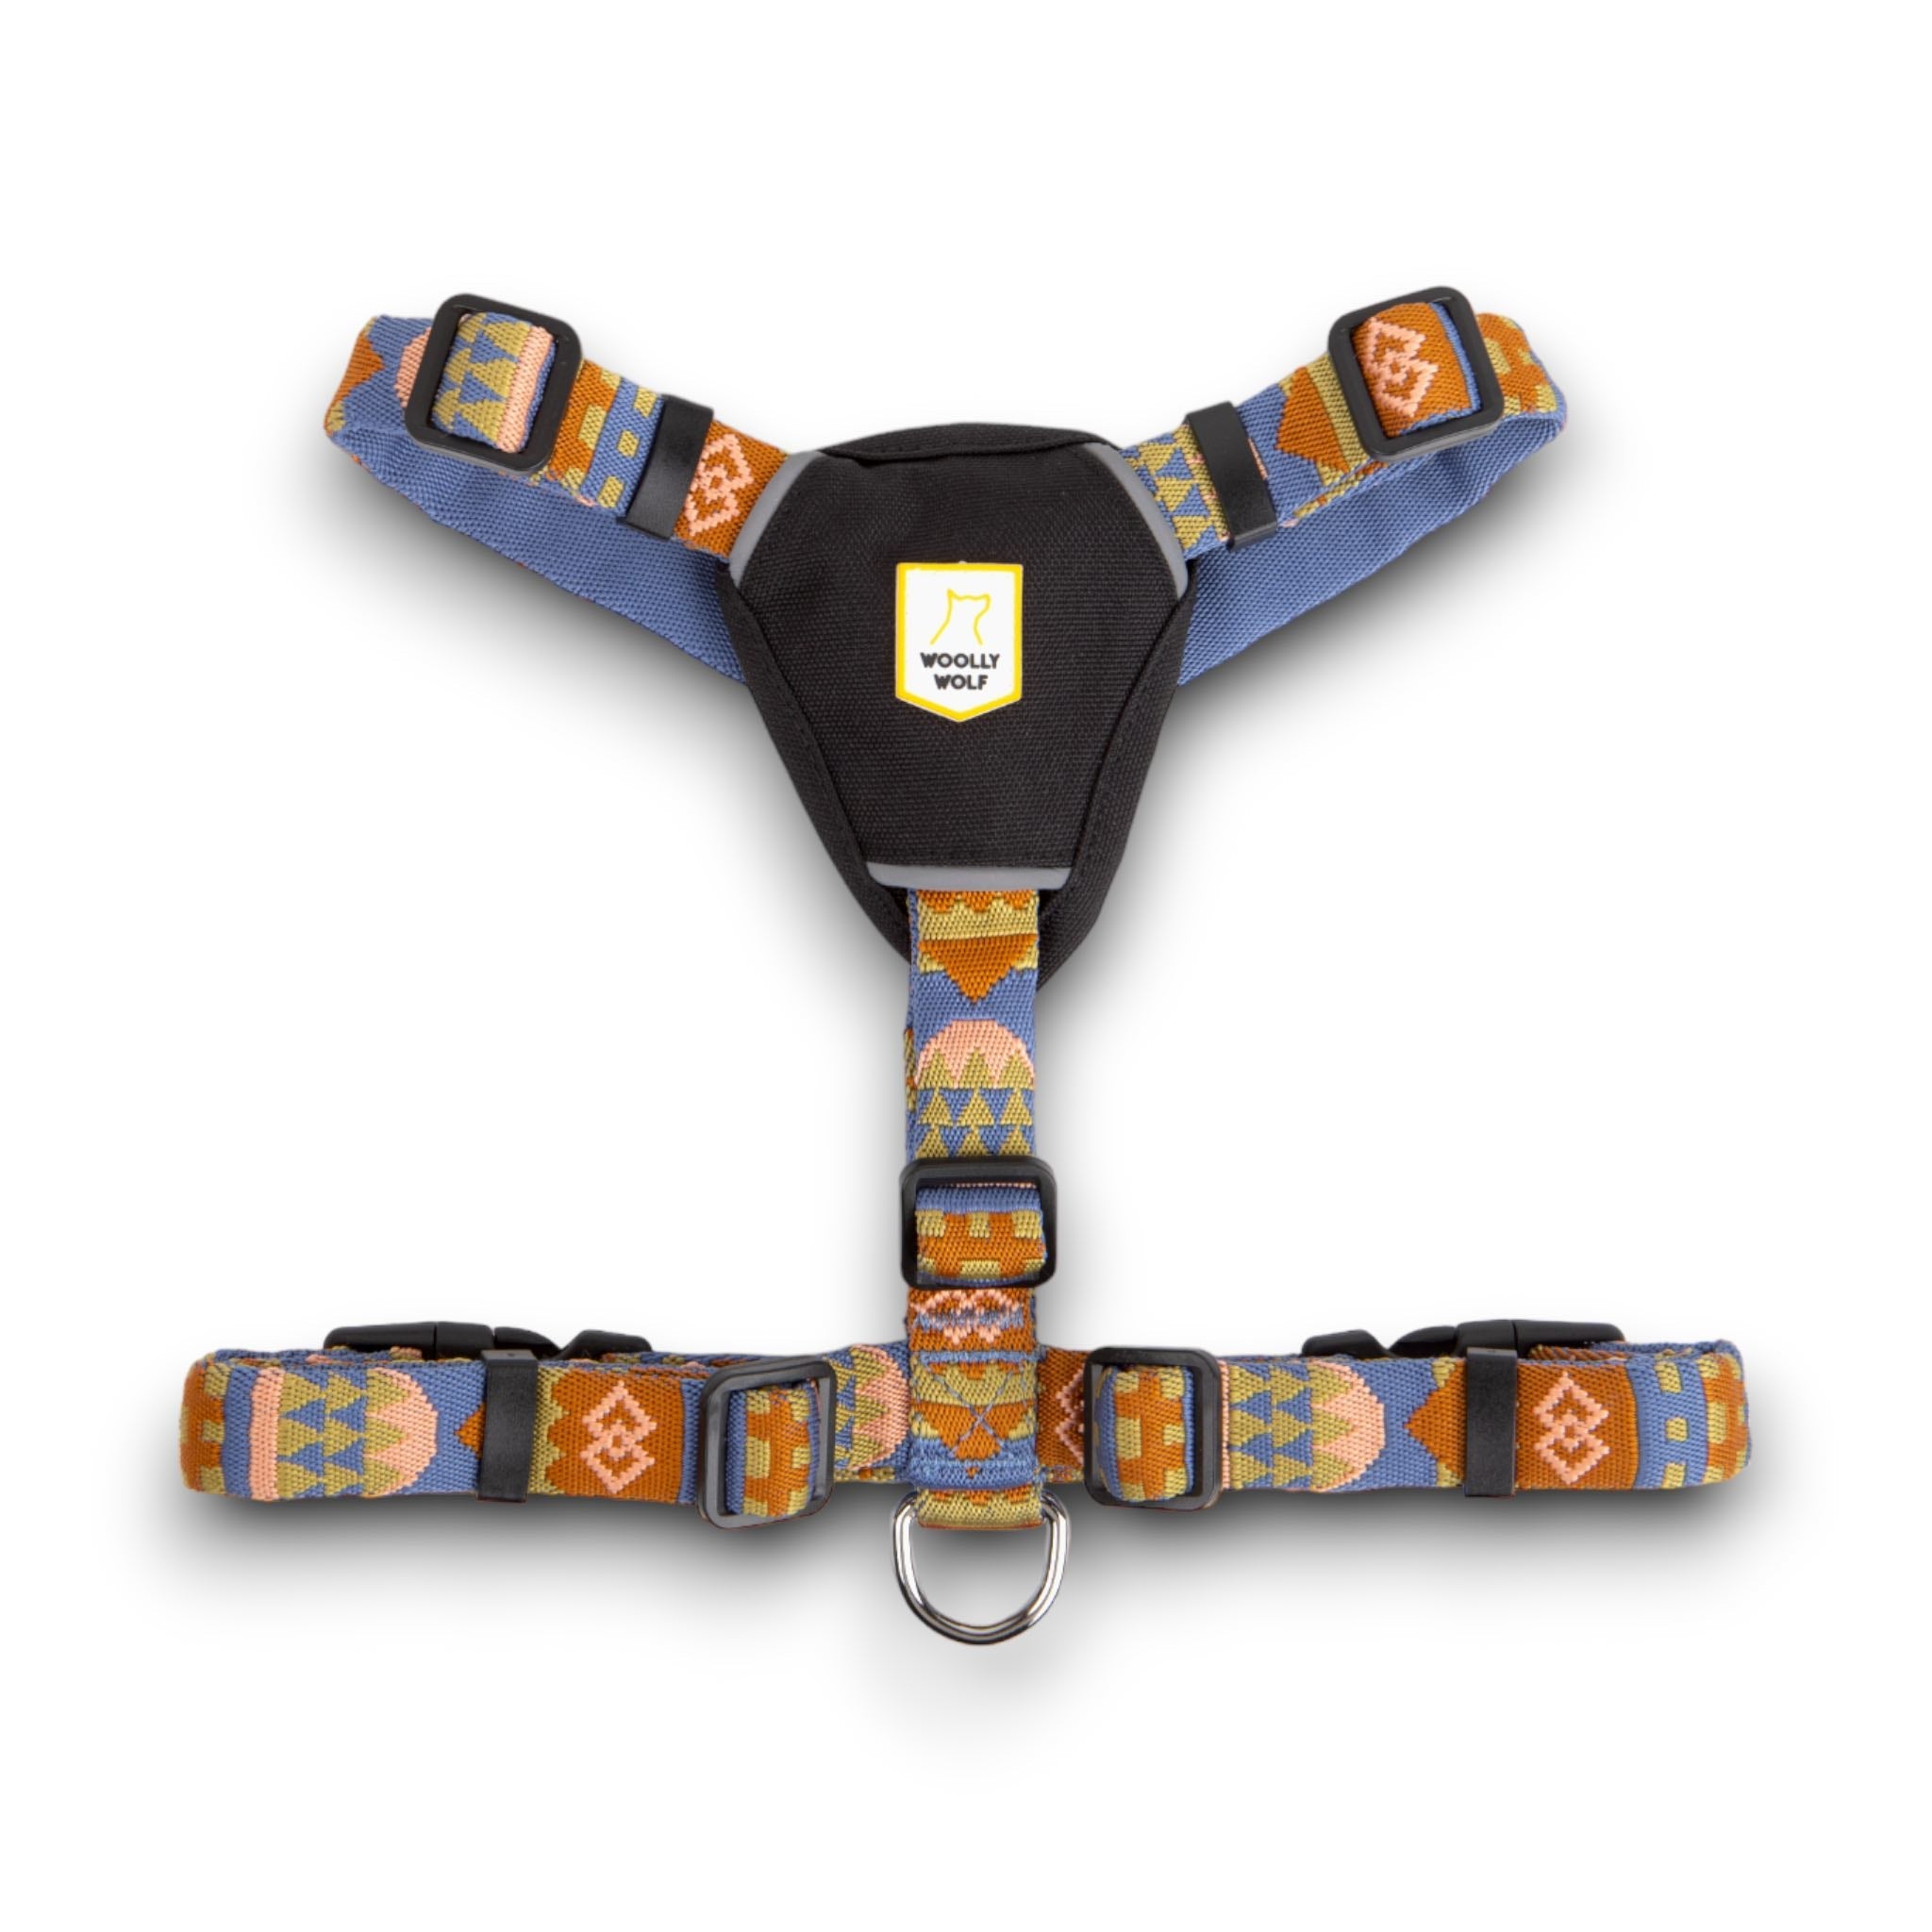 Sea to Summit Harness – Woolly Wolf